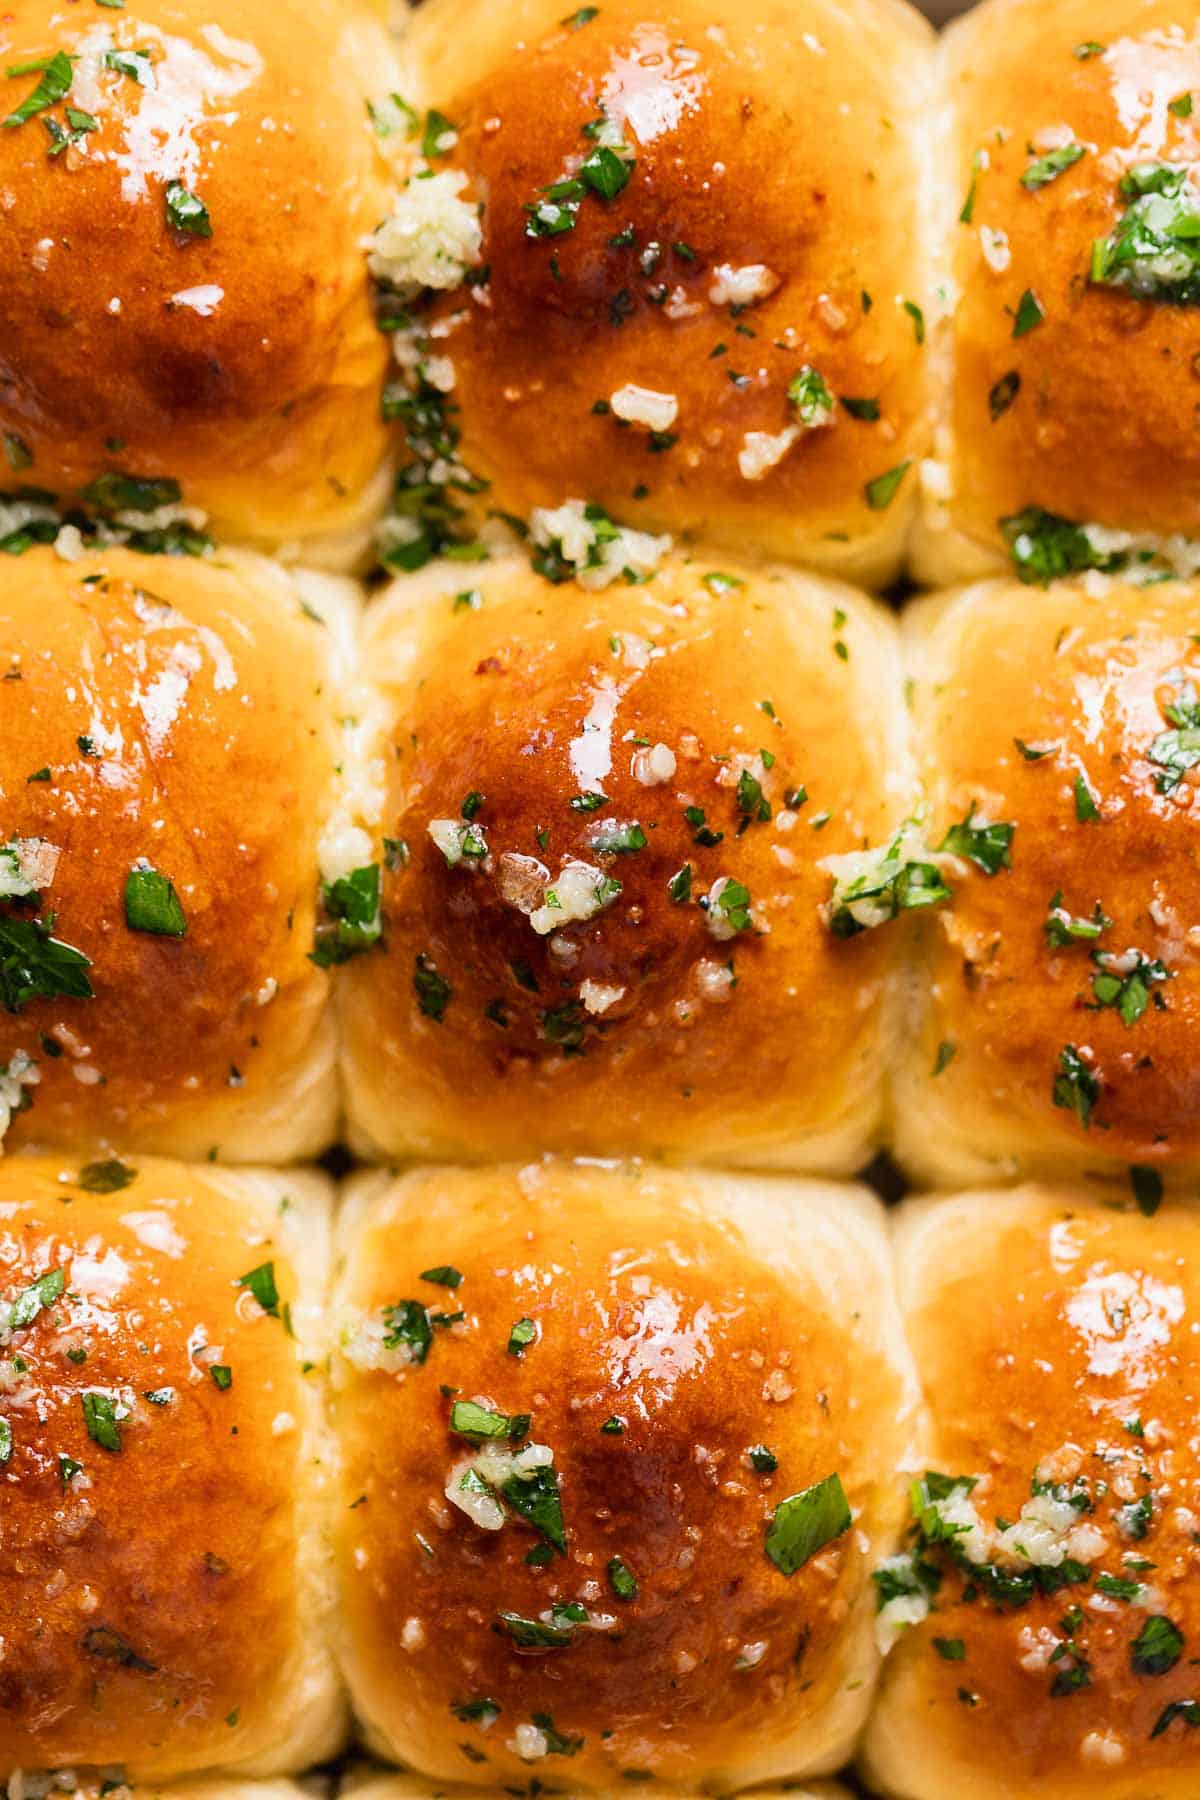 Buttered garlic bread rolls covered in herbs and garlic.